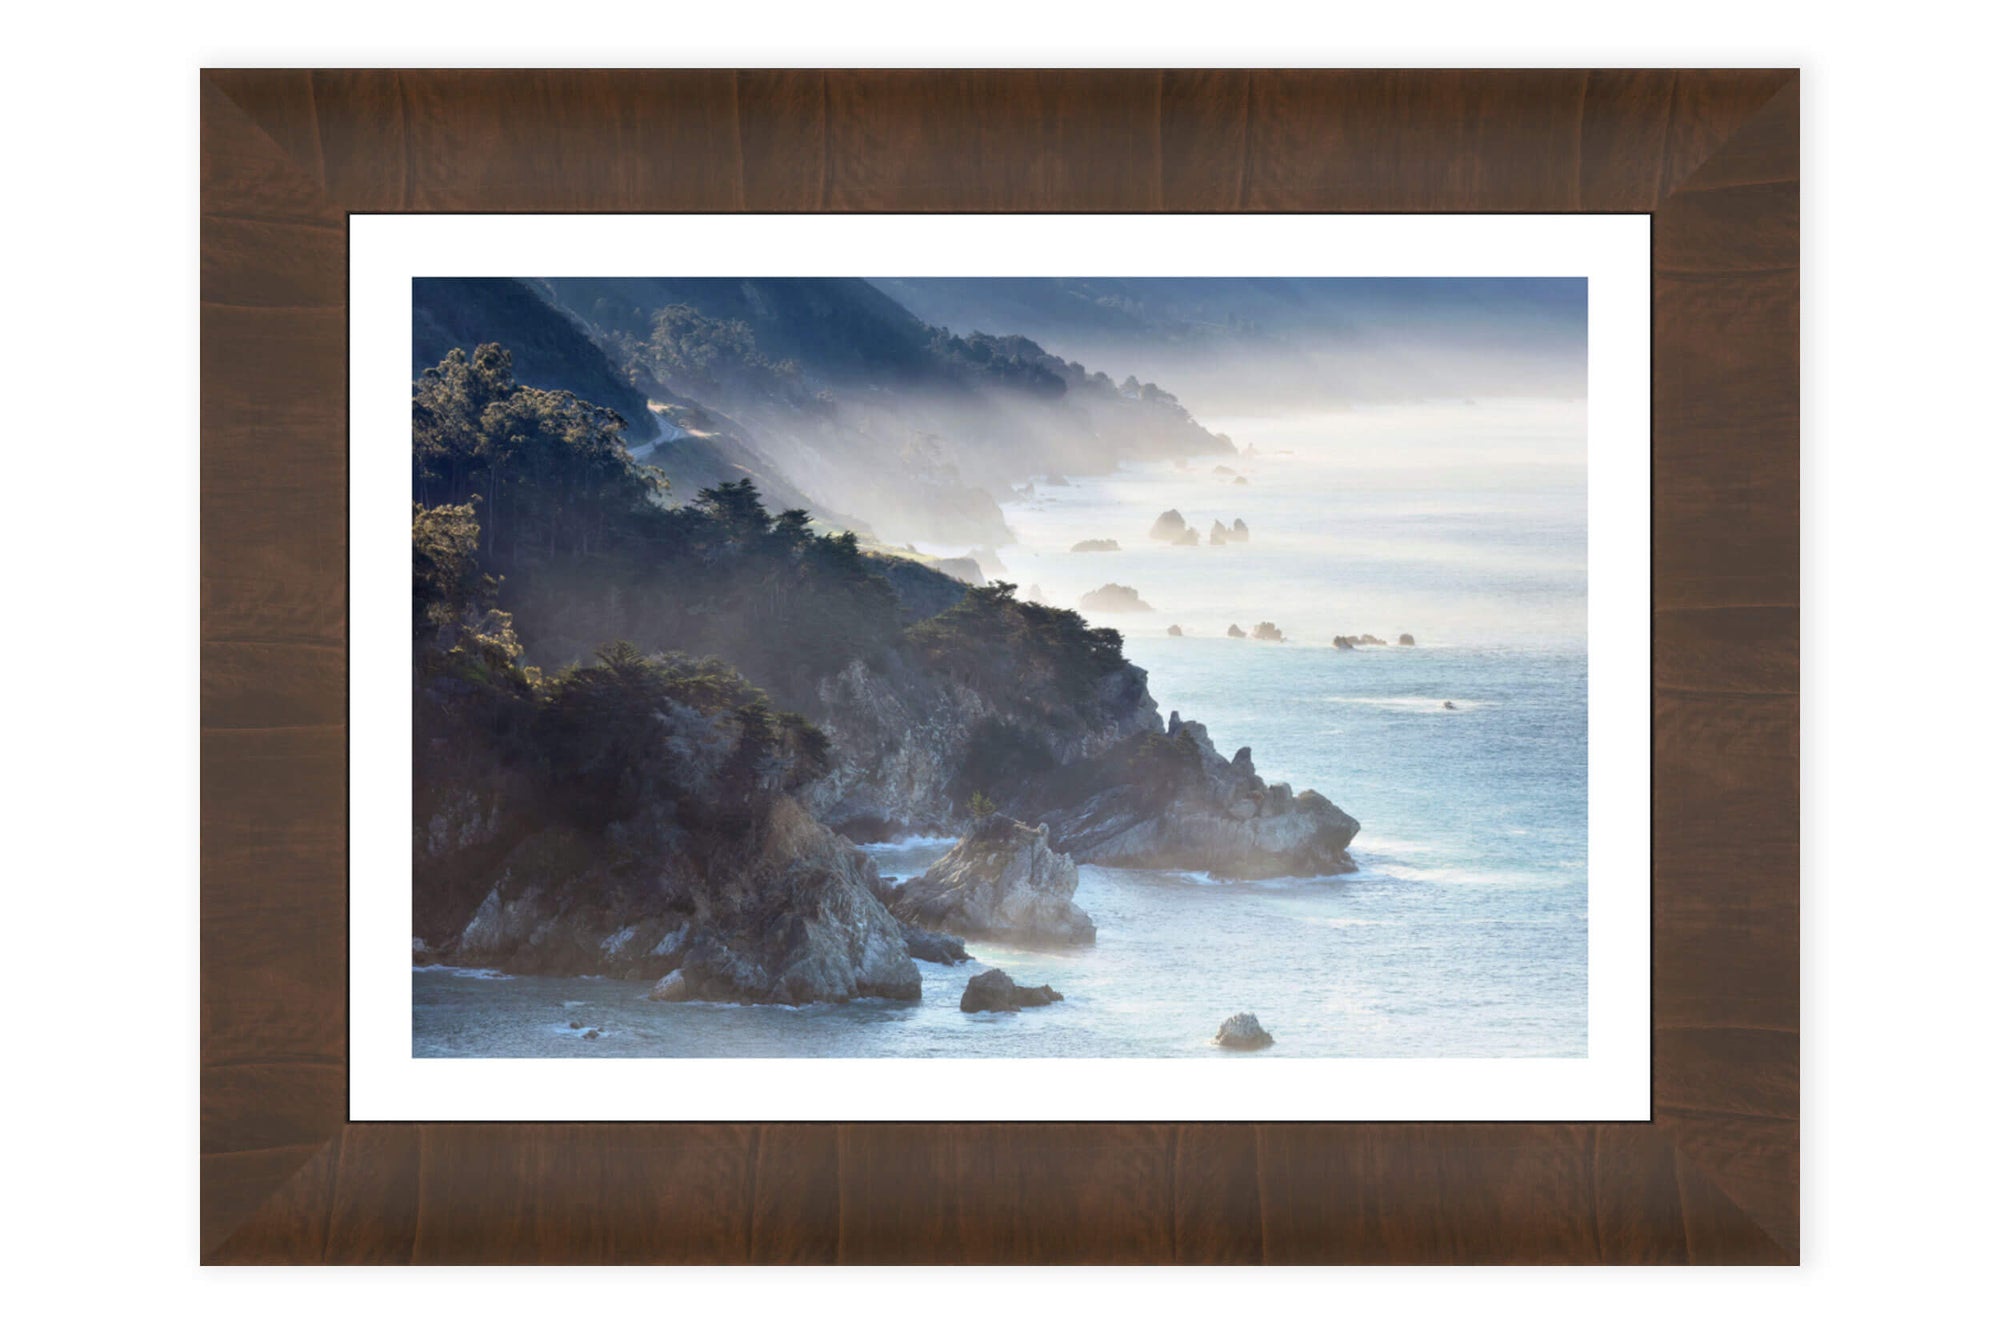 A framed Big Sur picture from California.